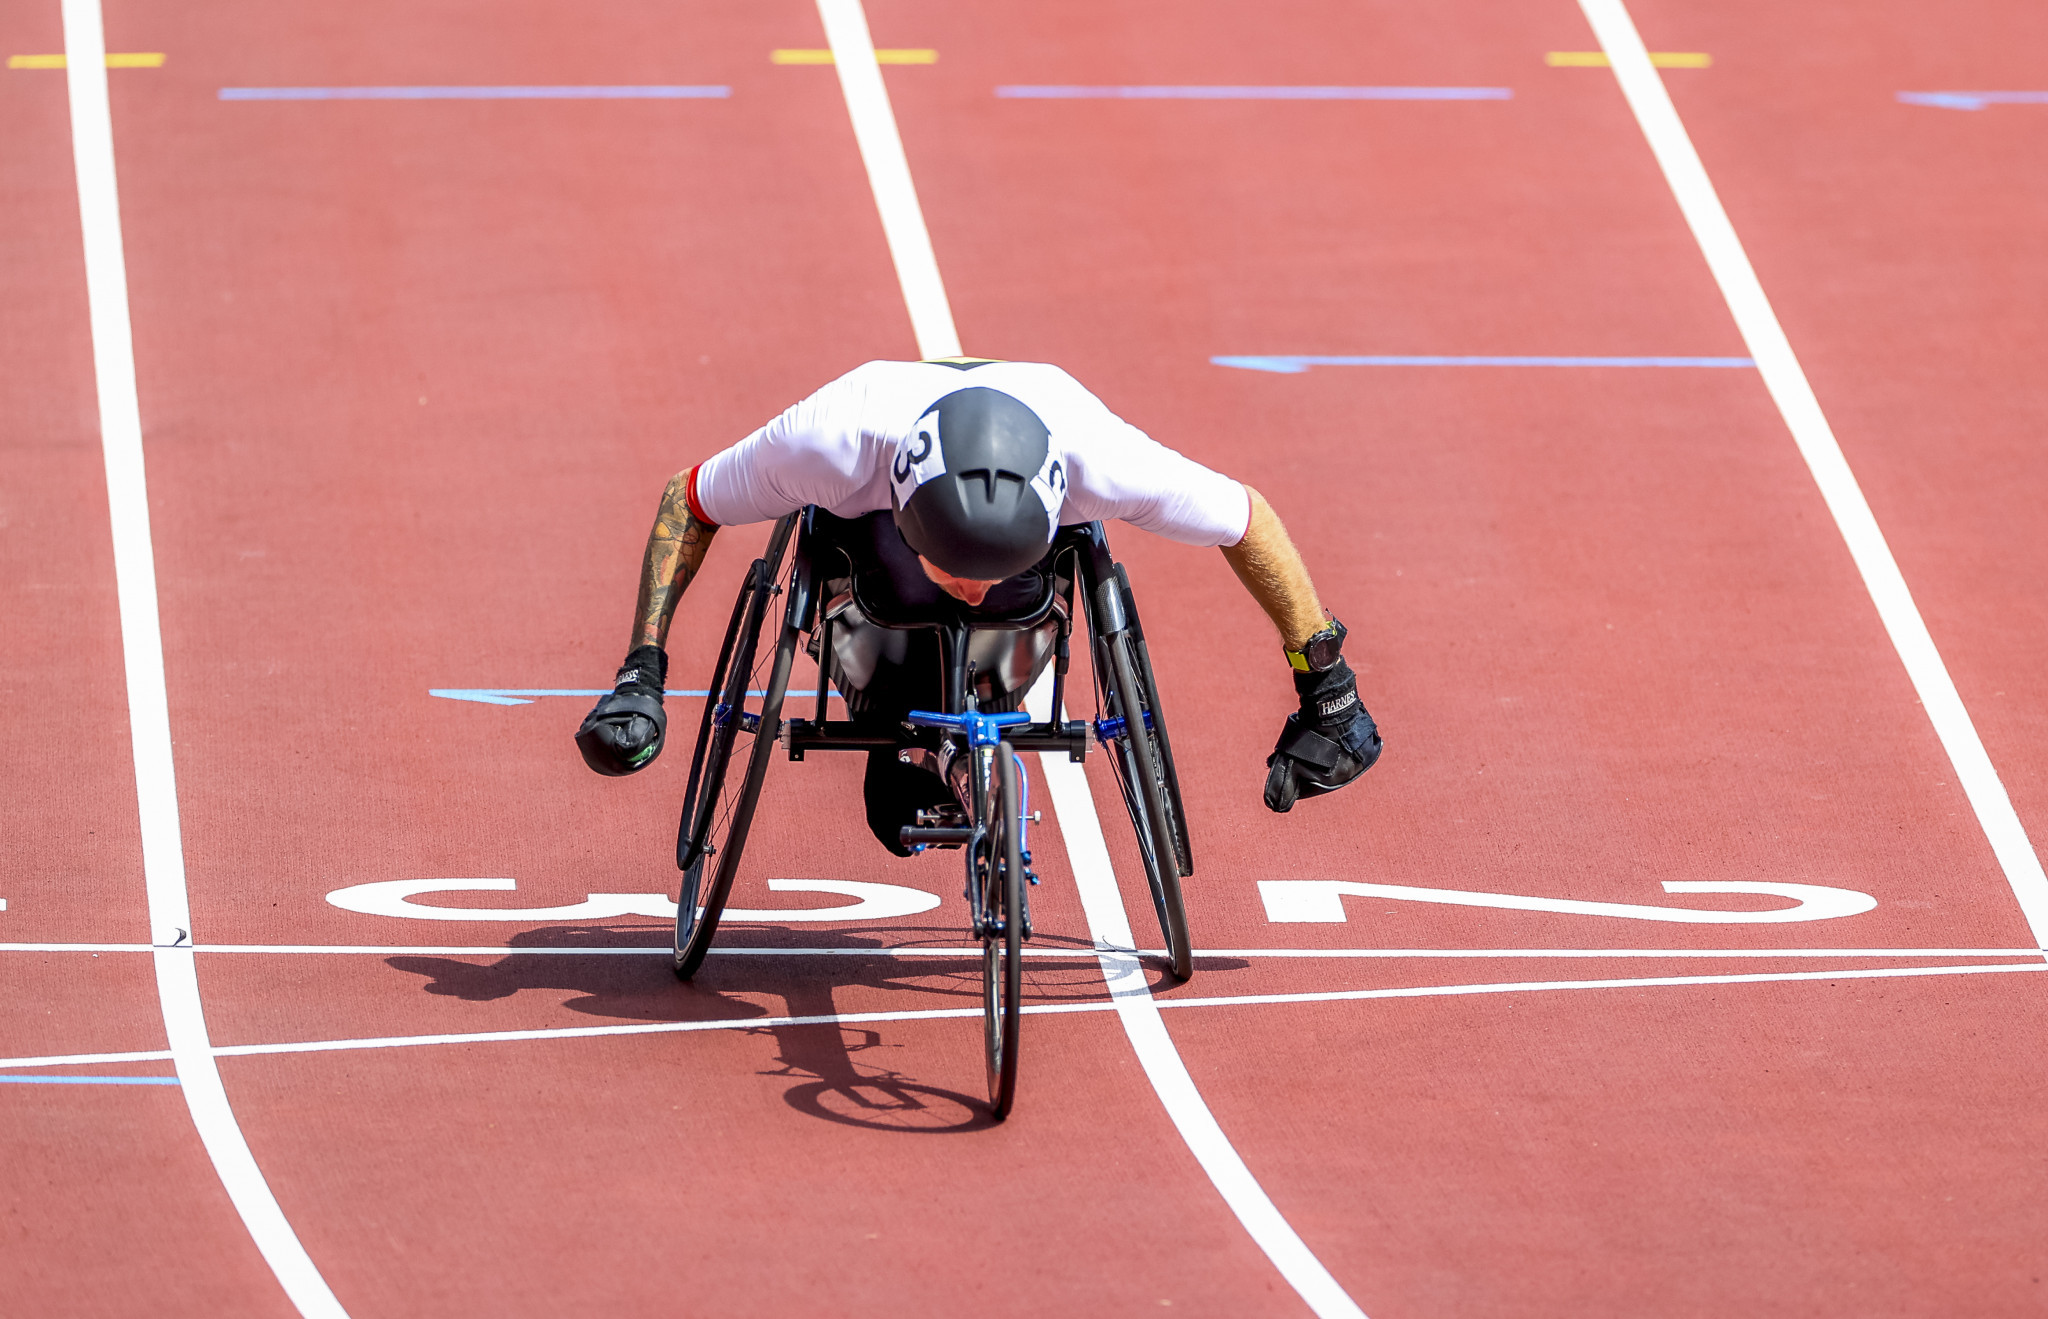 Belgium's Roger Habsch has set a new T51 100m world record with a time of 19.68 seconds ©Getty Images